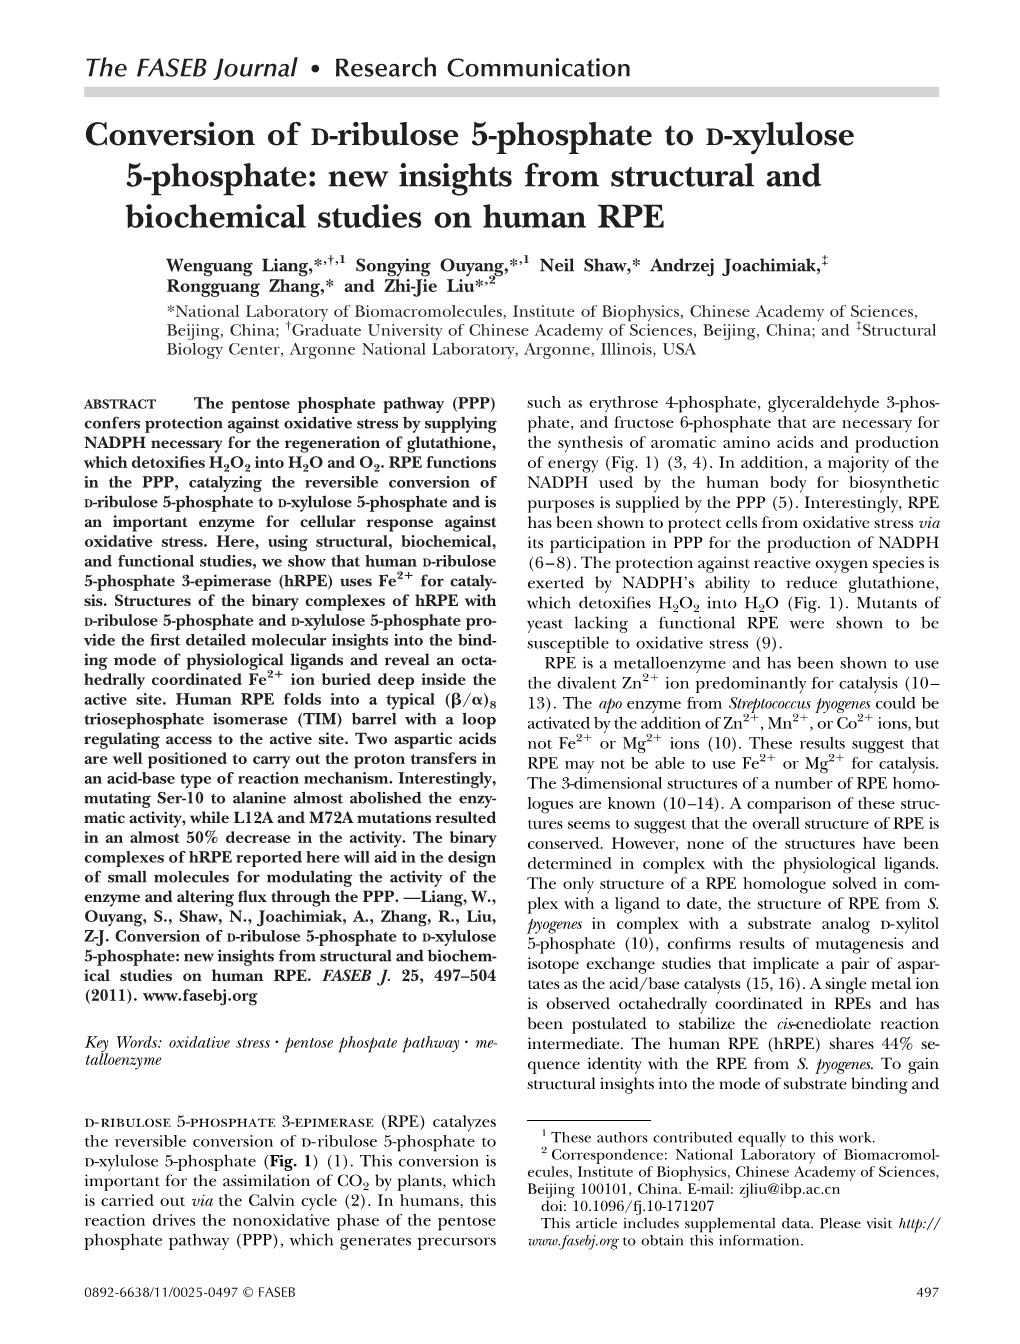 Conversion of D-Ribulose 5-Phosphate to D-Xylulose 5-Phosphate: New Insights from Structural and Biochemical Studies on Human RPE